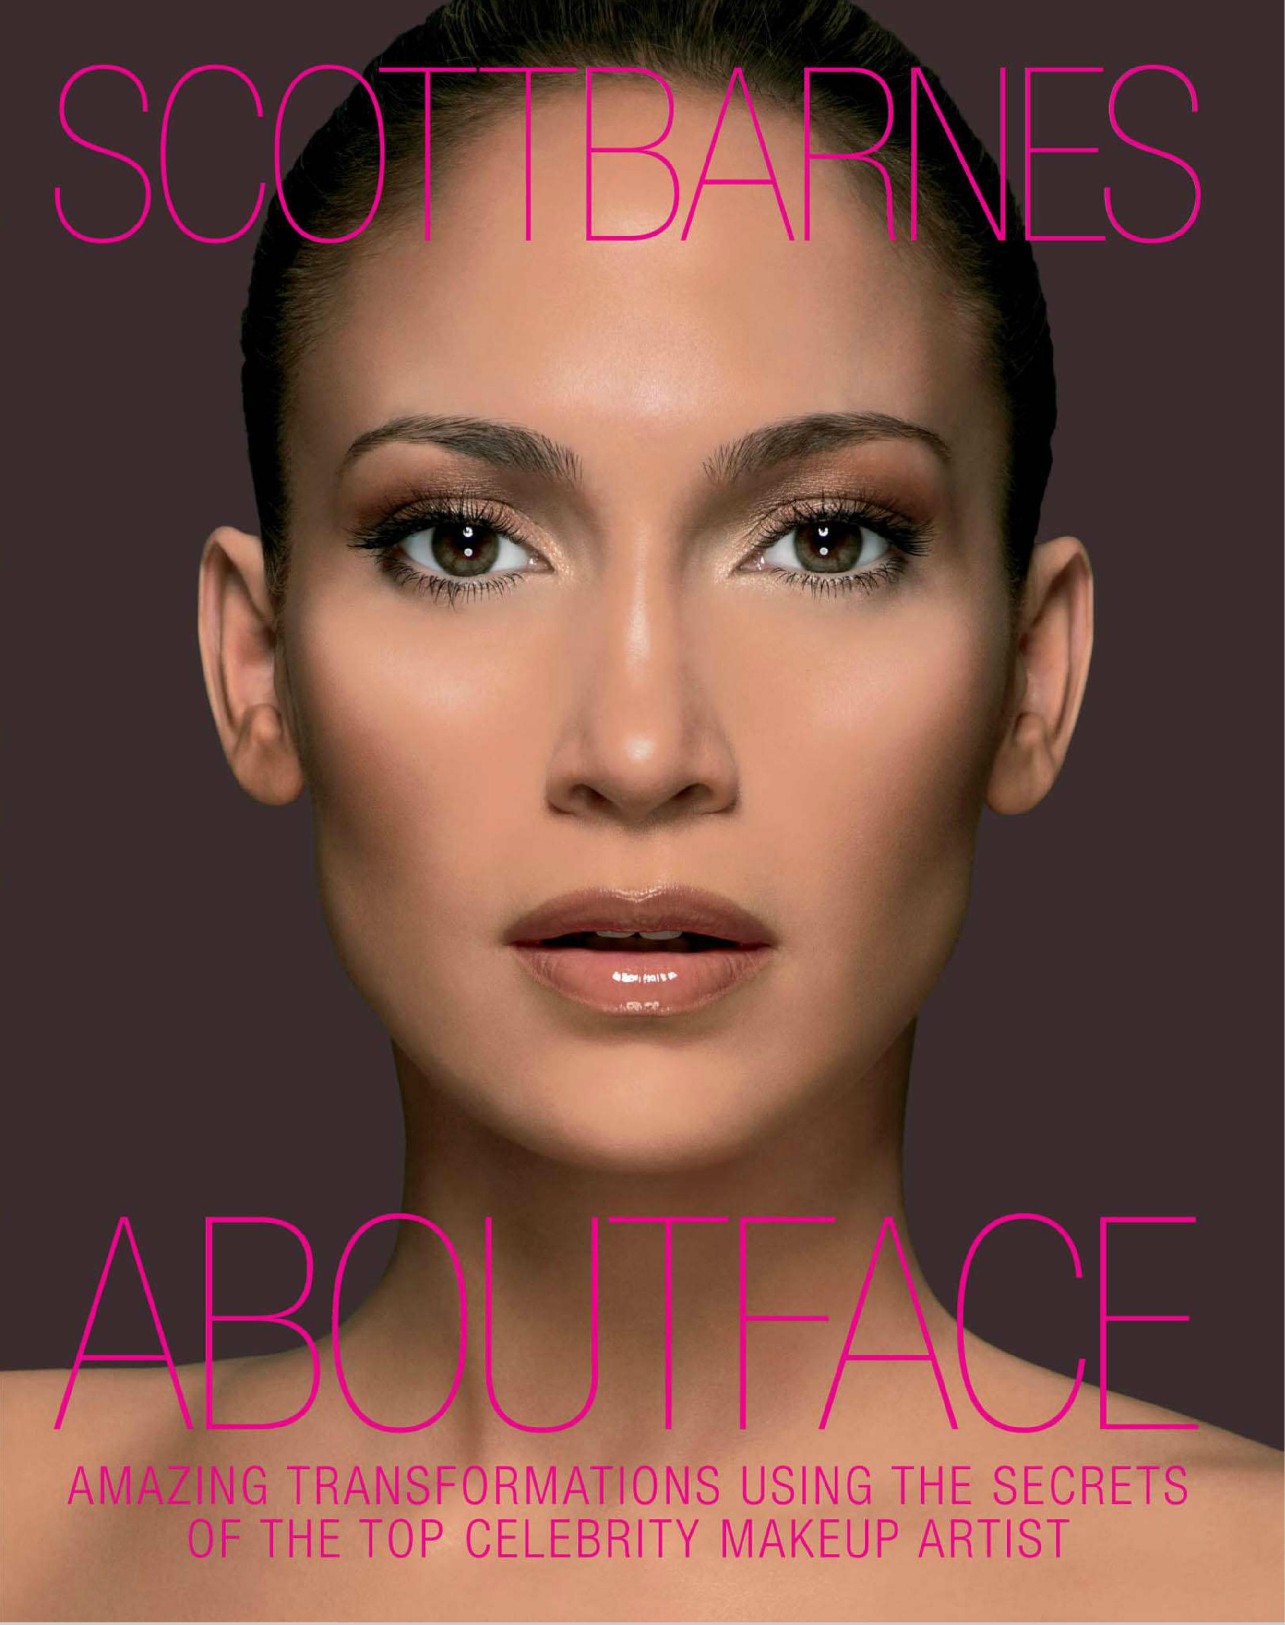 About Face Amazing Transformations